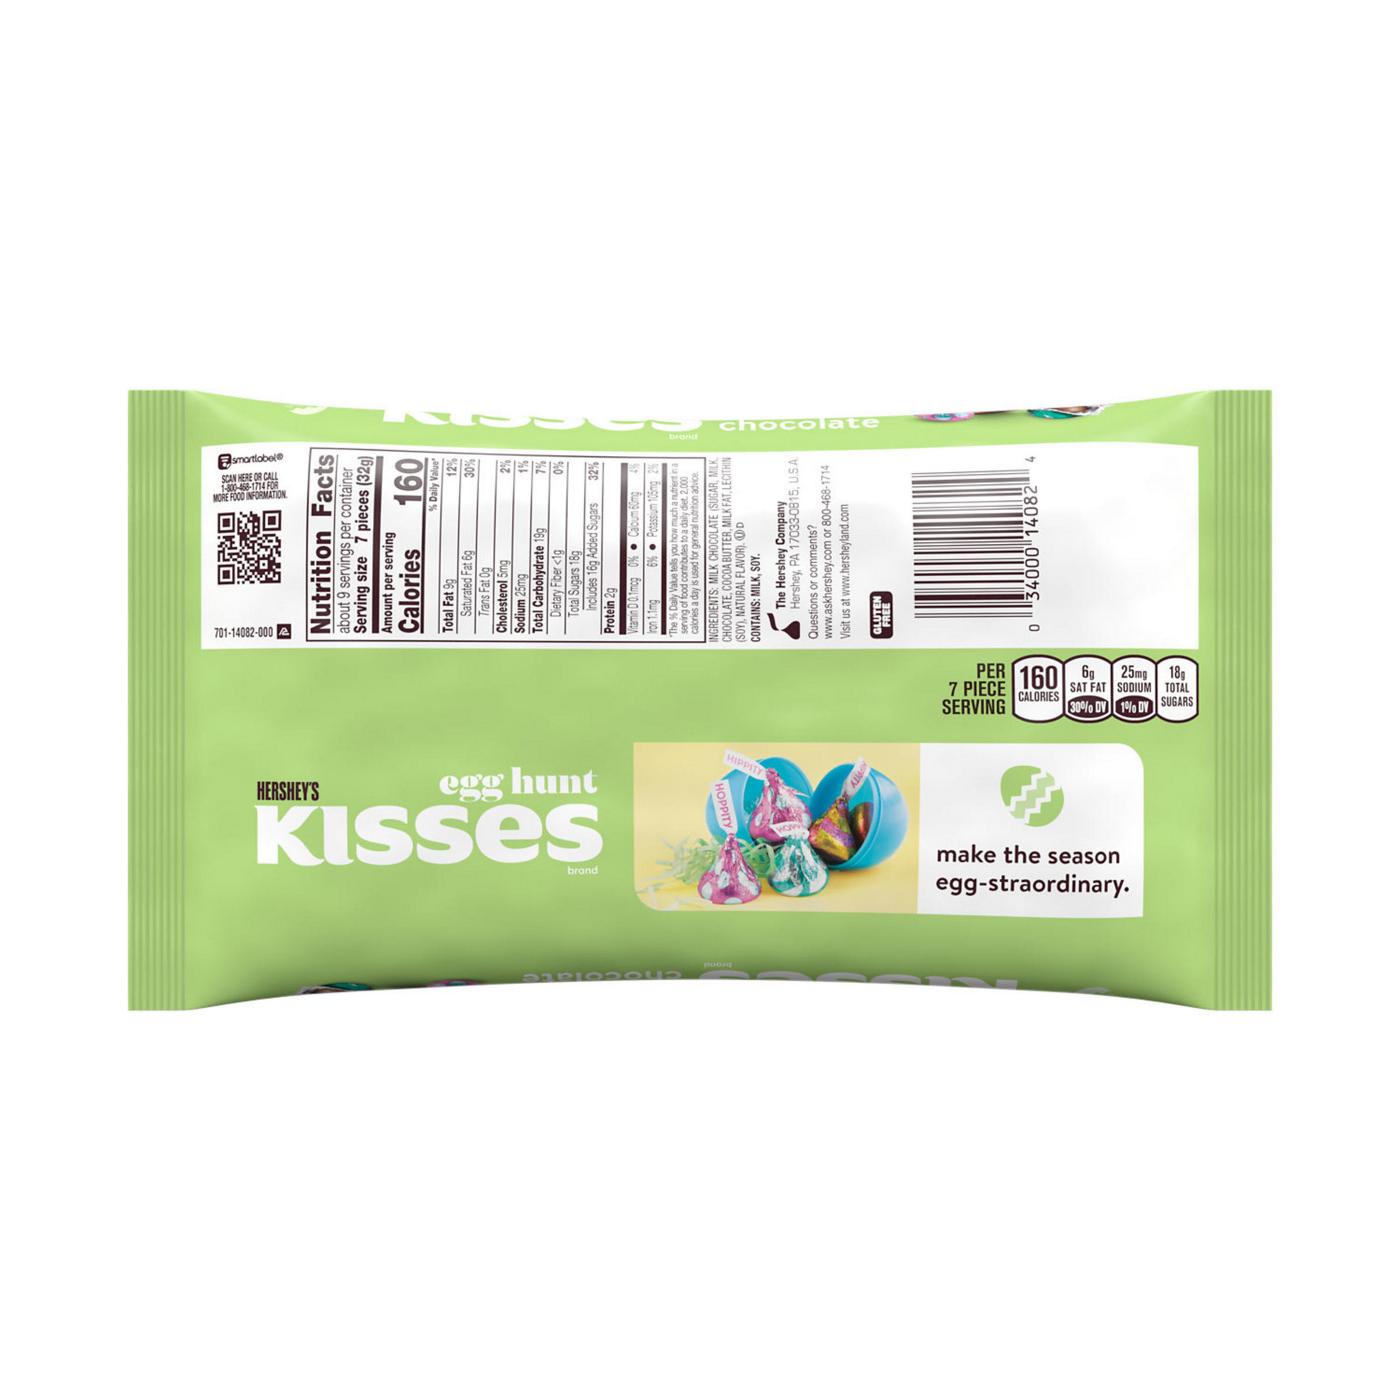 Hershey's Kisses Milk Chocolate Easter Candy; image 5 of 9